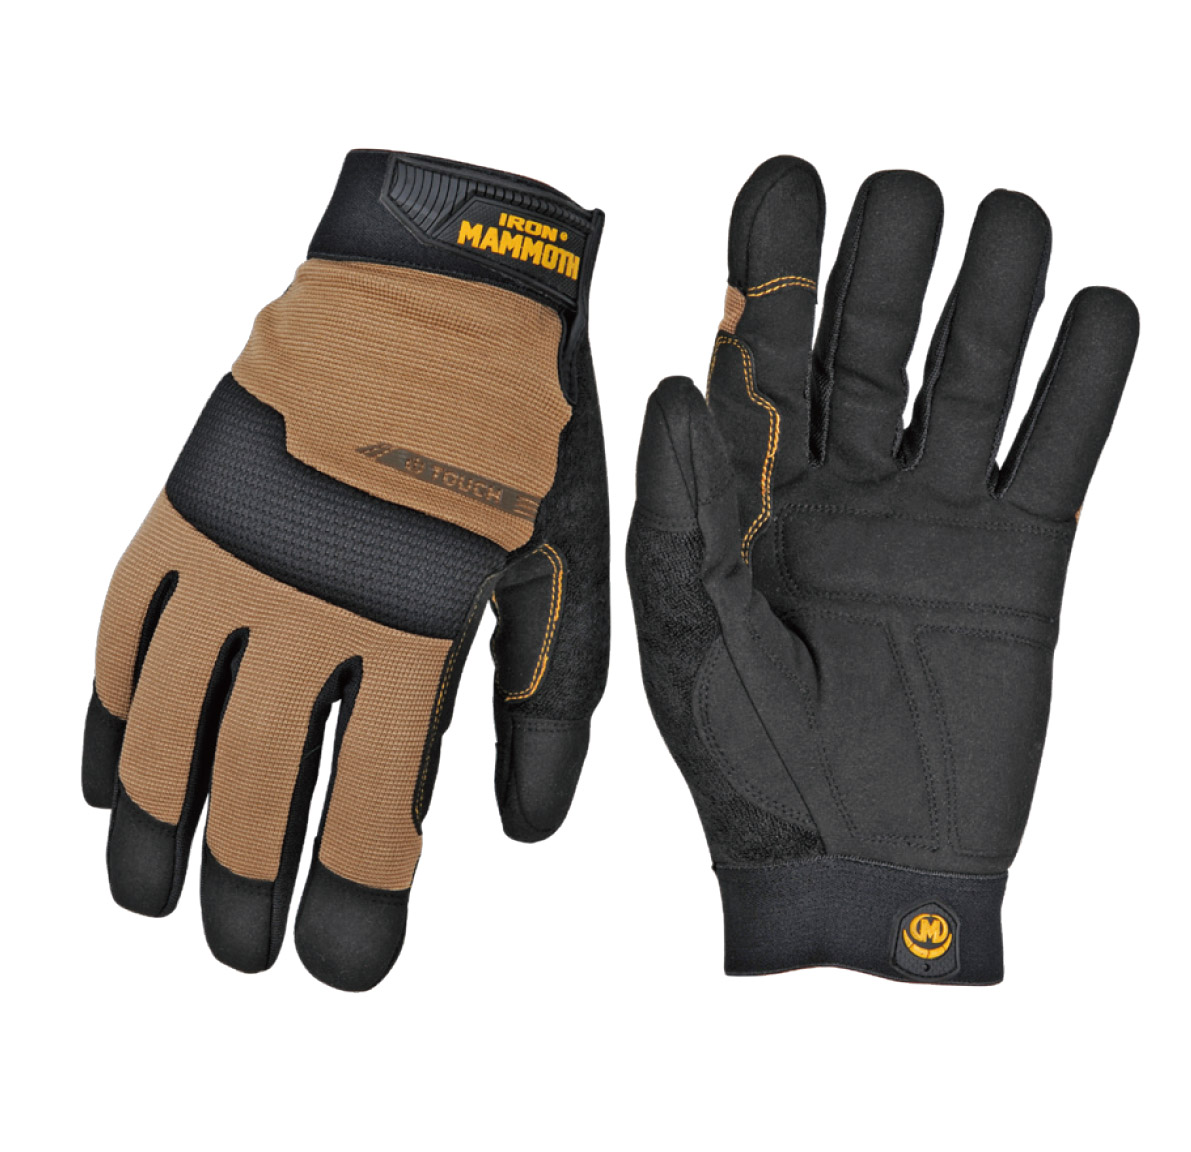 GENERAL UTILITY TOUCH-SCREEN WORK GLOVES